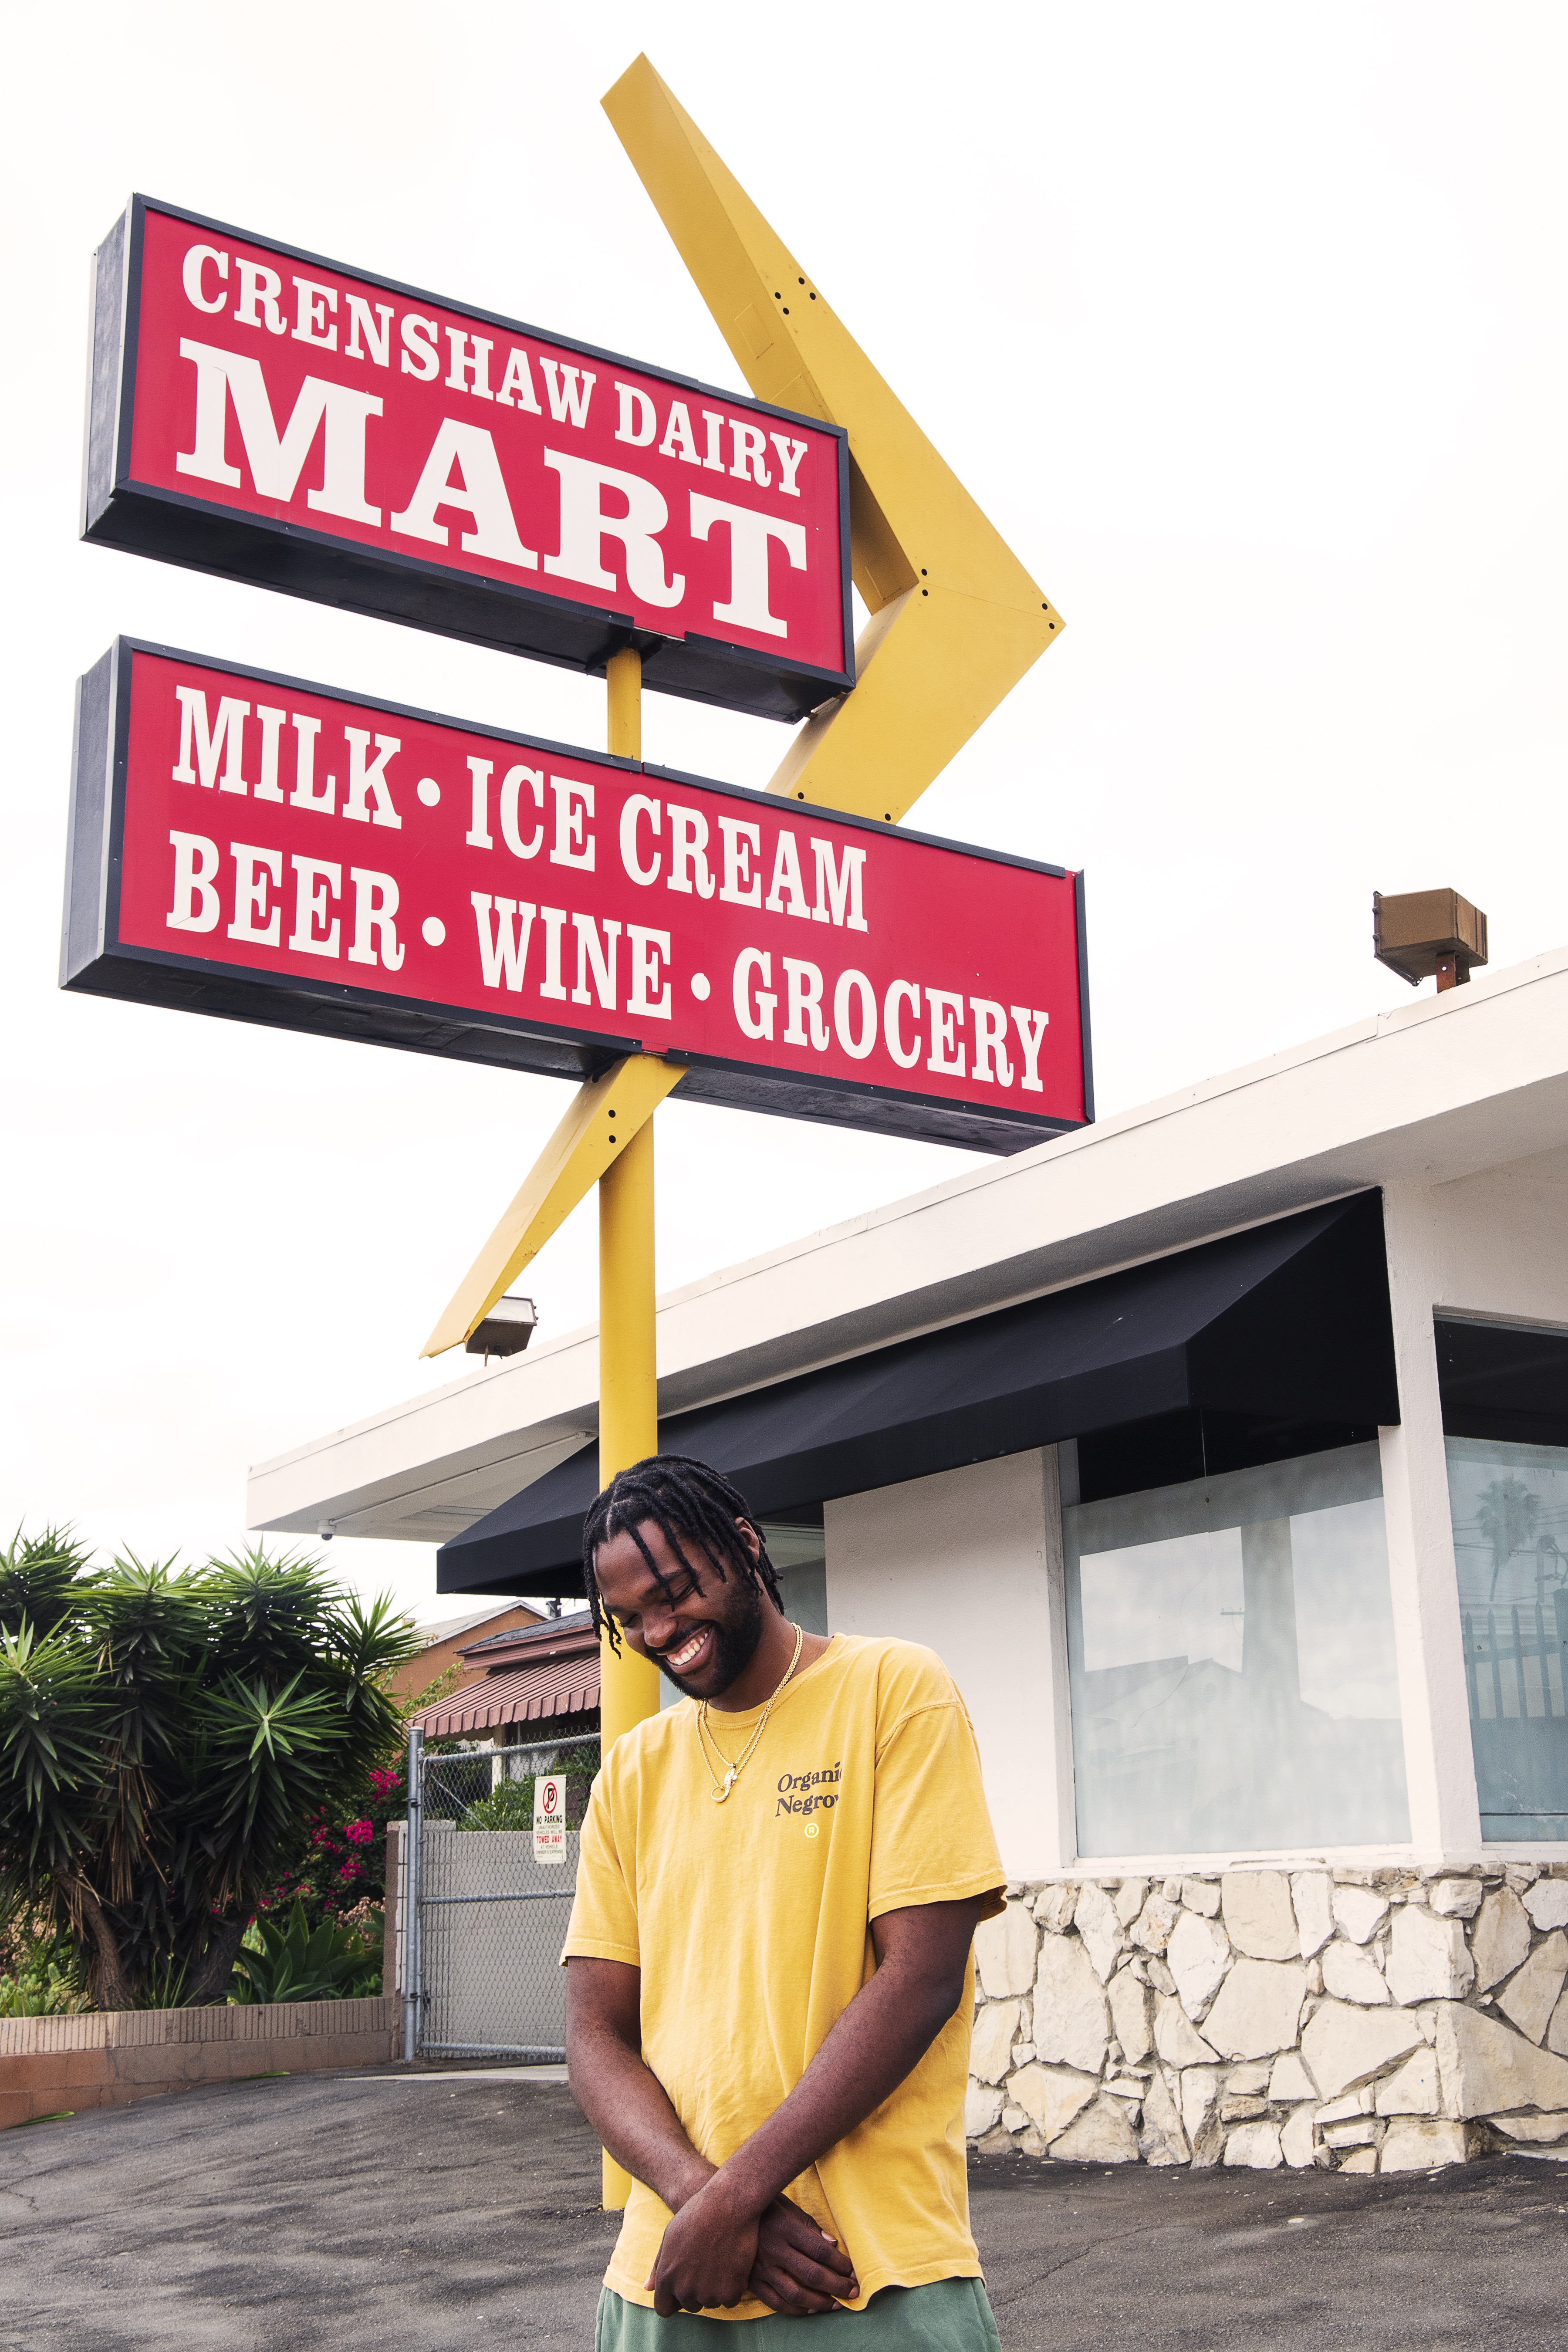 Oto-Abasi Attah: Don't Forget to Touch Grass — Crenshaw Dairy Mart